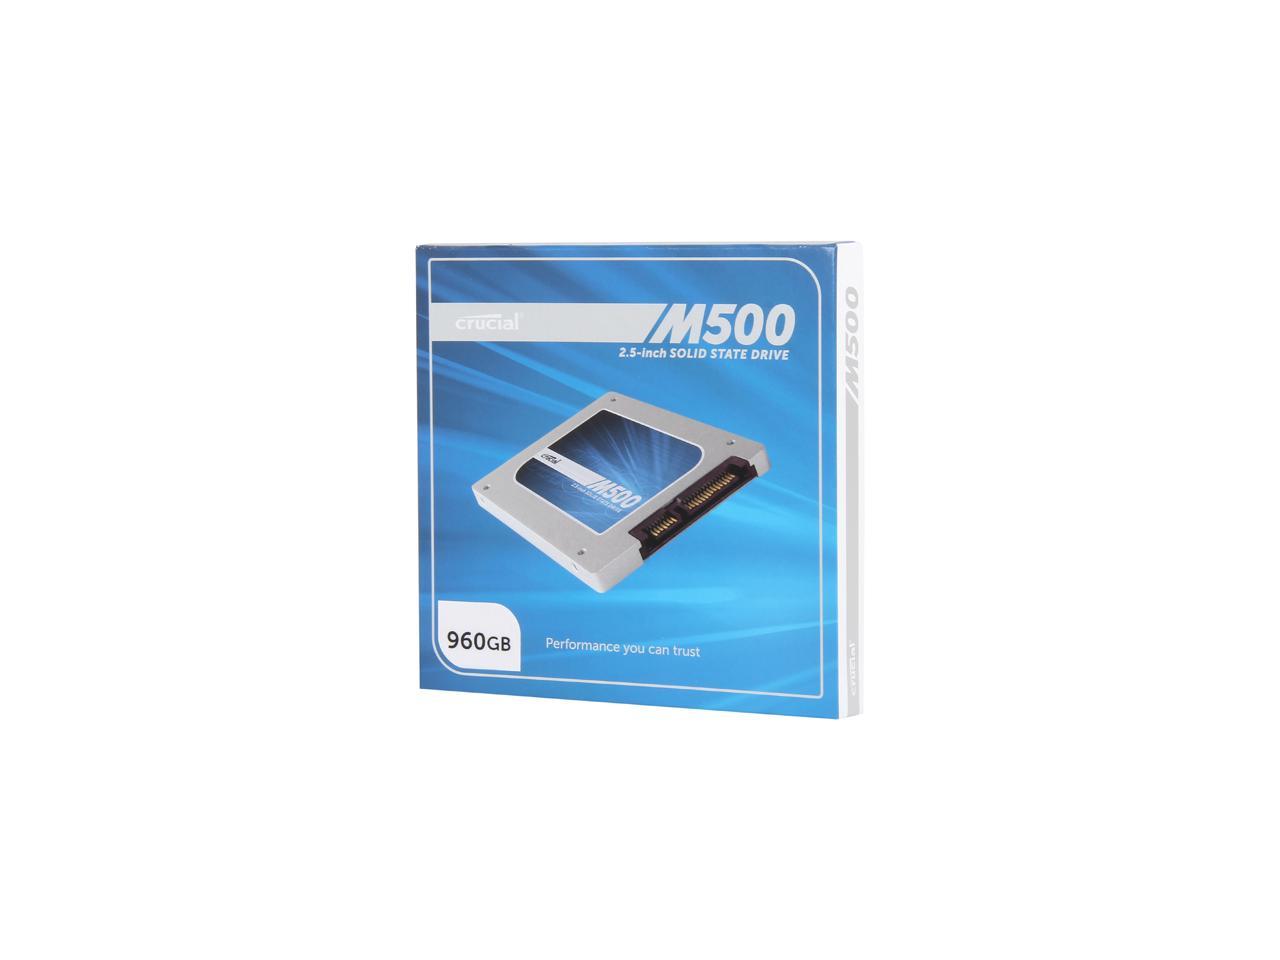 Crucial M500 CT960M500SSD1 7mm (with 9.5mm adapter) 2.5" 960GB SATA III MLC Internal Solid State Drive (SSD)